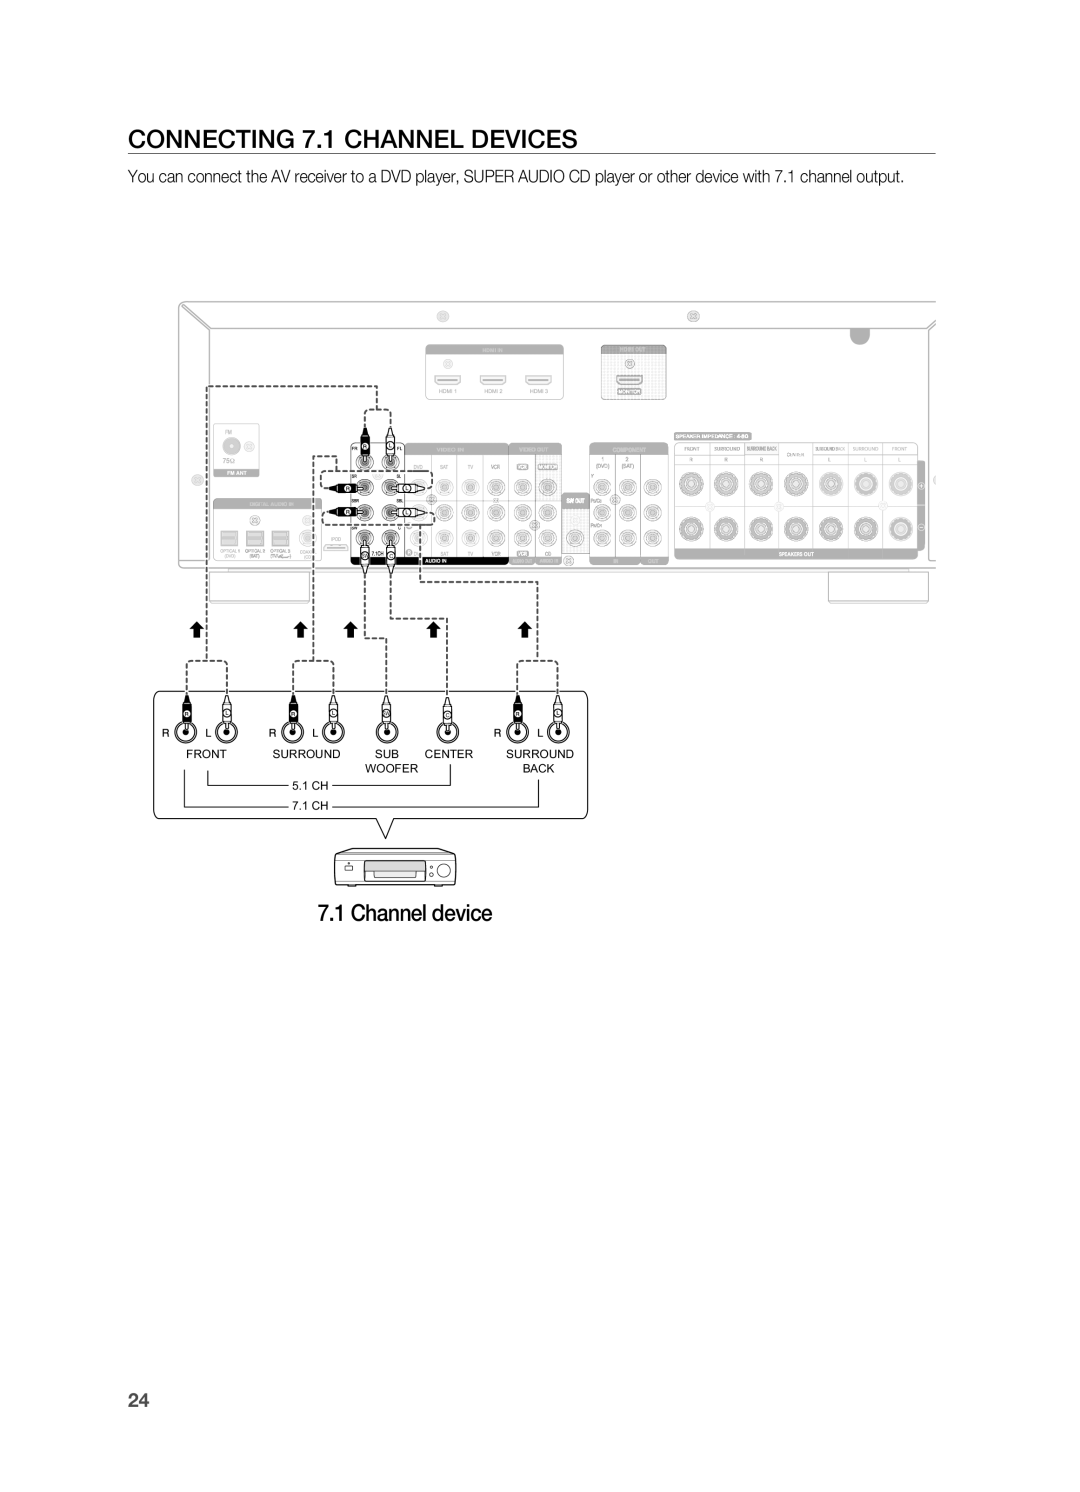 Samsung HT-AS730ST user manual Connecting 7.1 channel devices, 7.1Channel device, Sw C Swc 